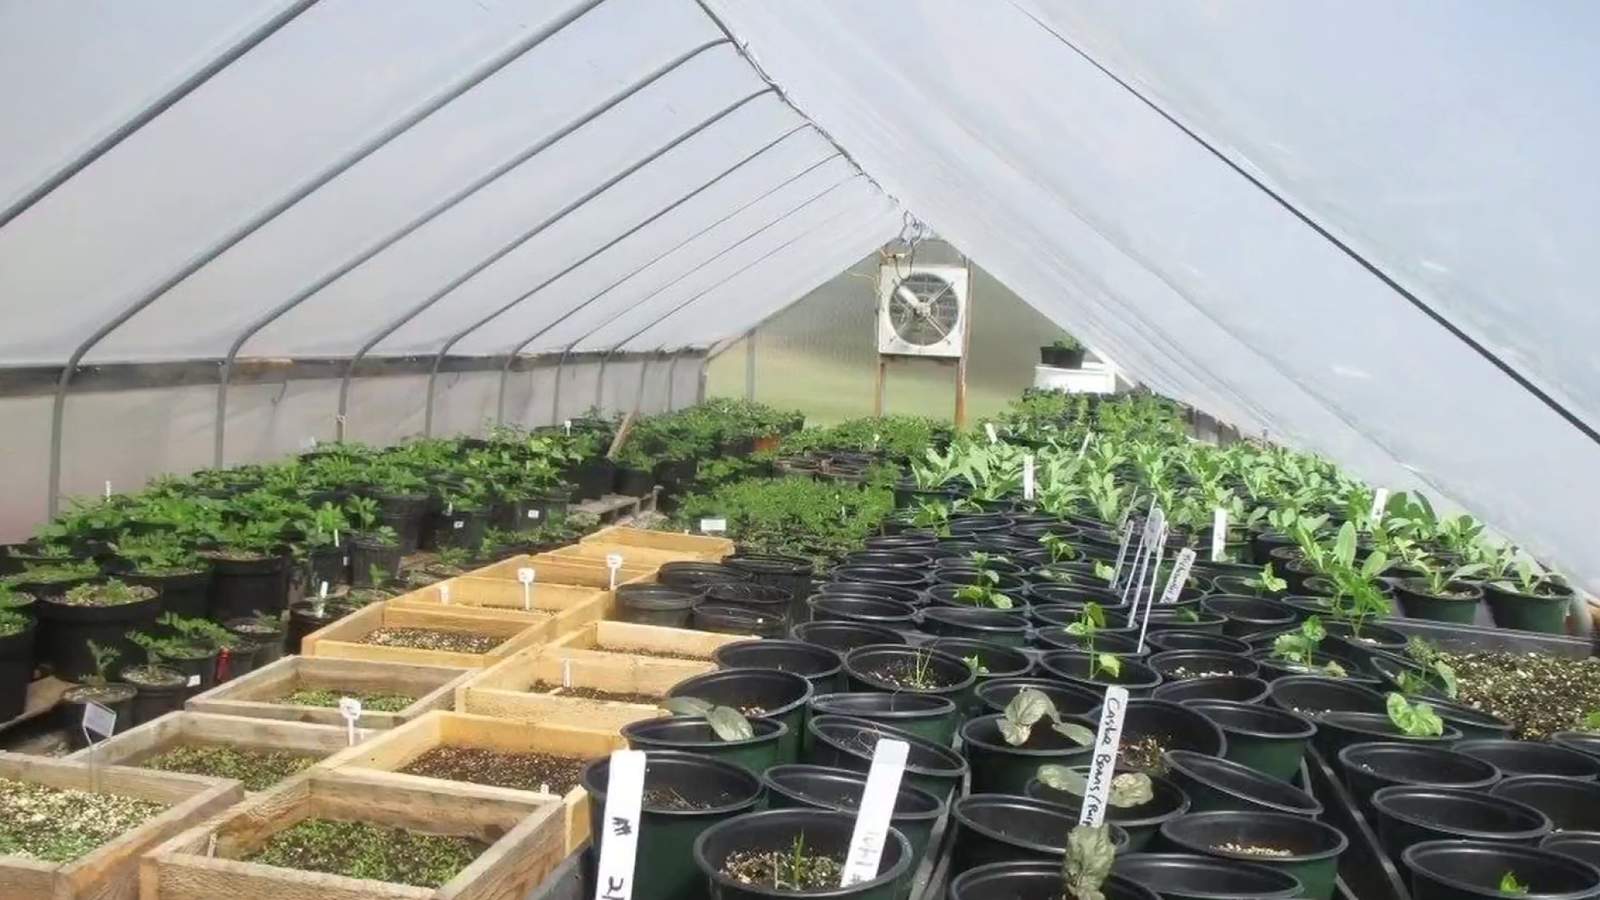 Growing community profit: Local business taps into medicinal herb industry